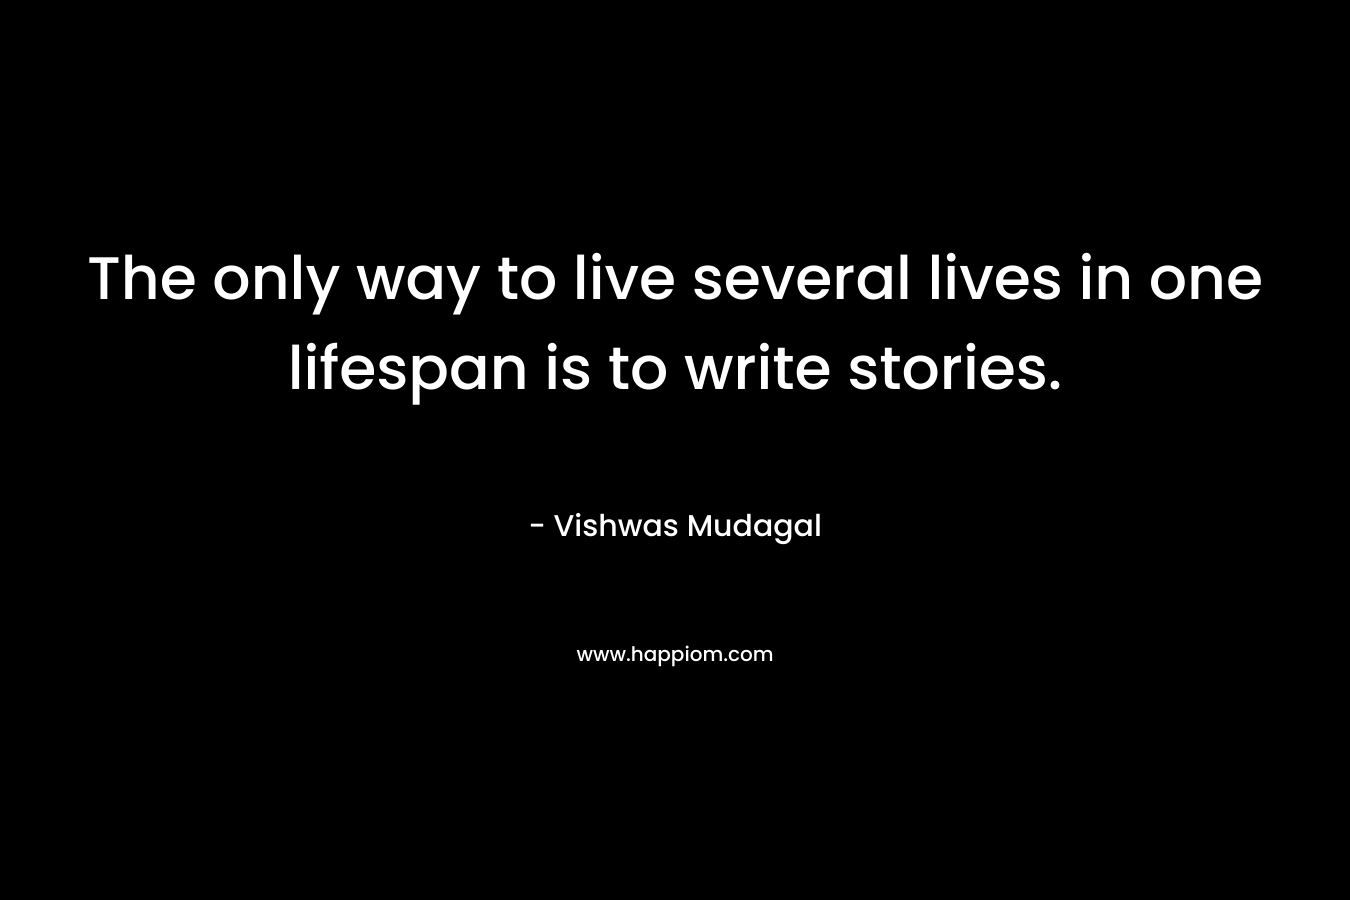 The only way to live several lives in one lifespan is to write stories.